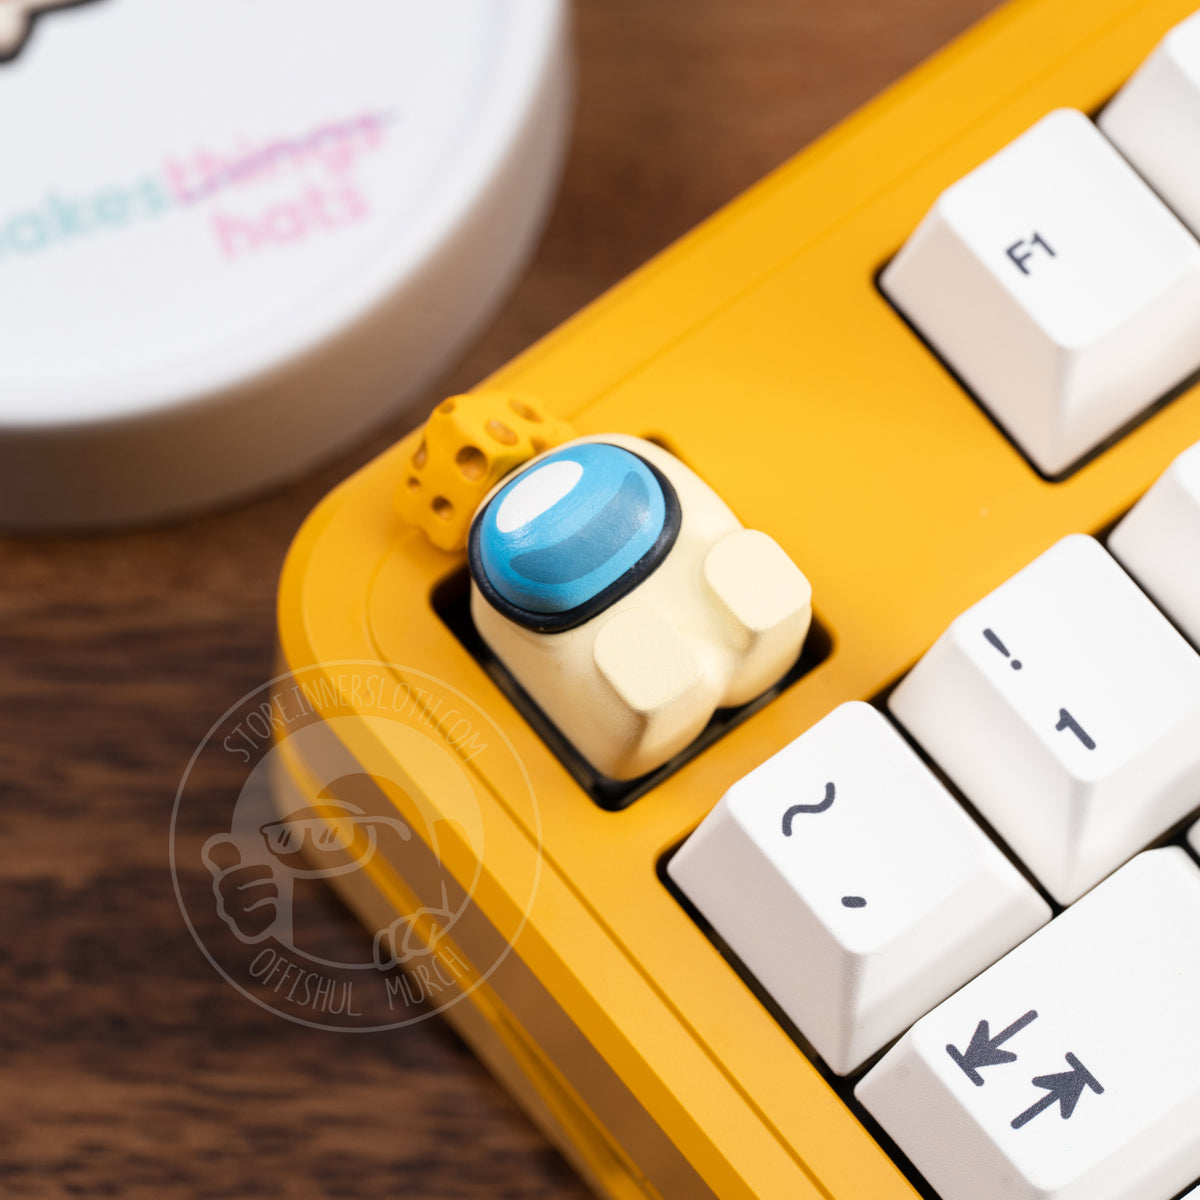 A lifestyle photo of the banana crewmate keycap taking the place of the escape key on a yellow keyboard with white keys. The crewmate keycap figure lays on its back, and is shown with a cheese wedge atop its head.